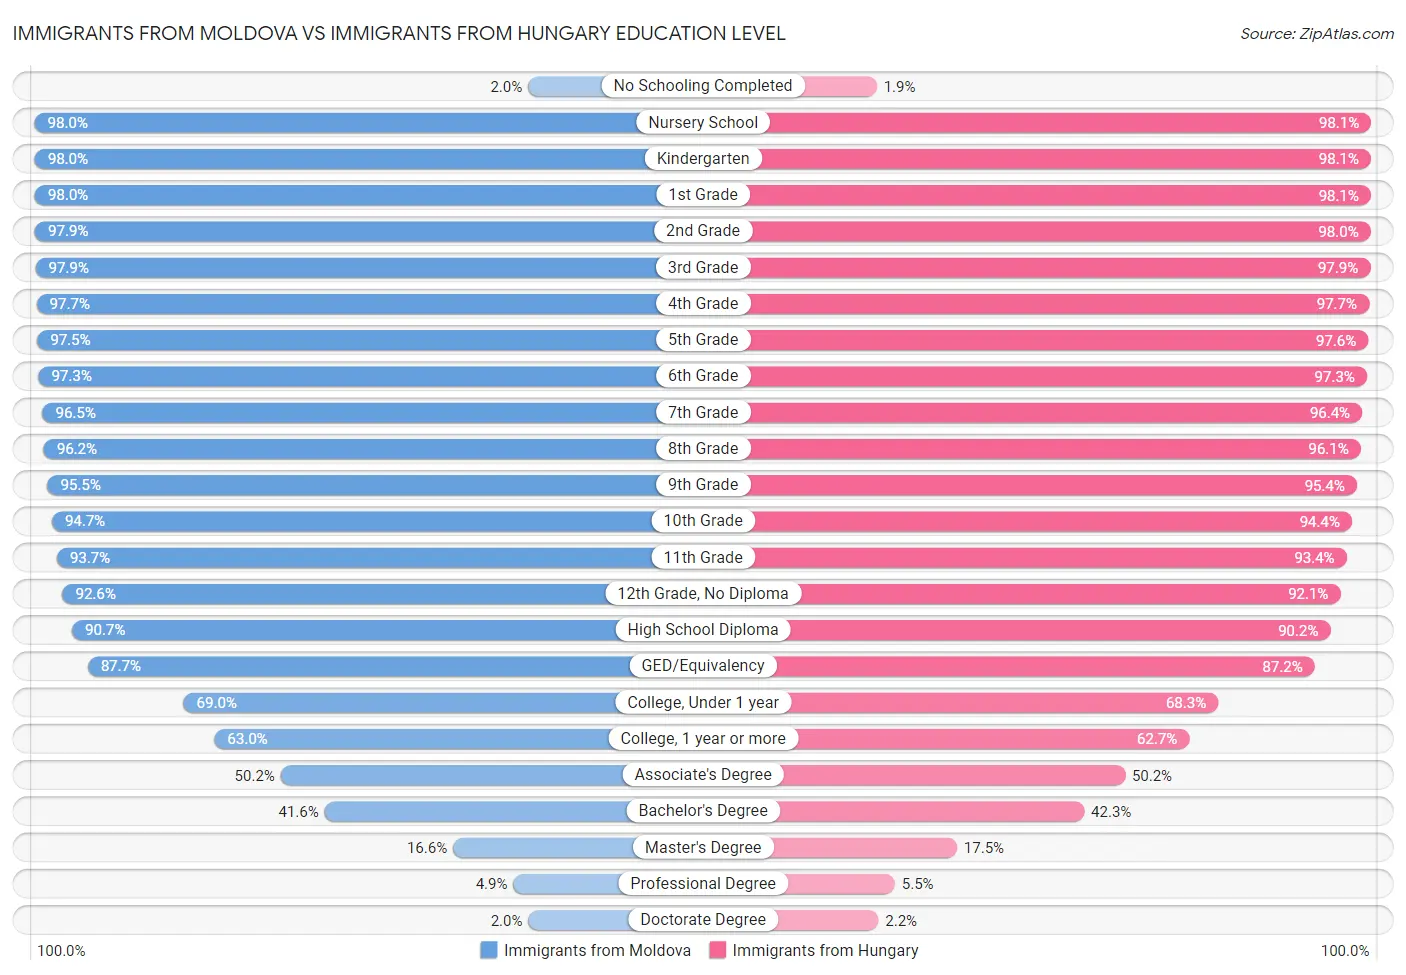 Immigrants from Moldova vs Immigrants from Hungary Education Level